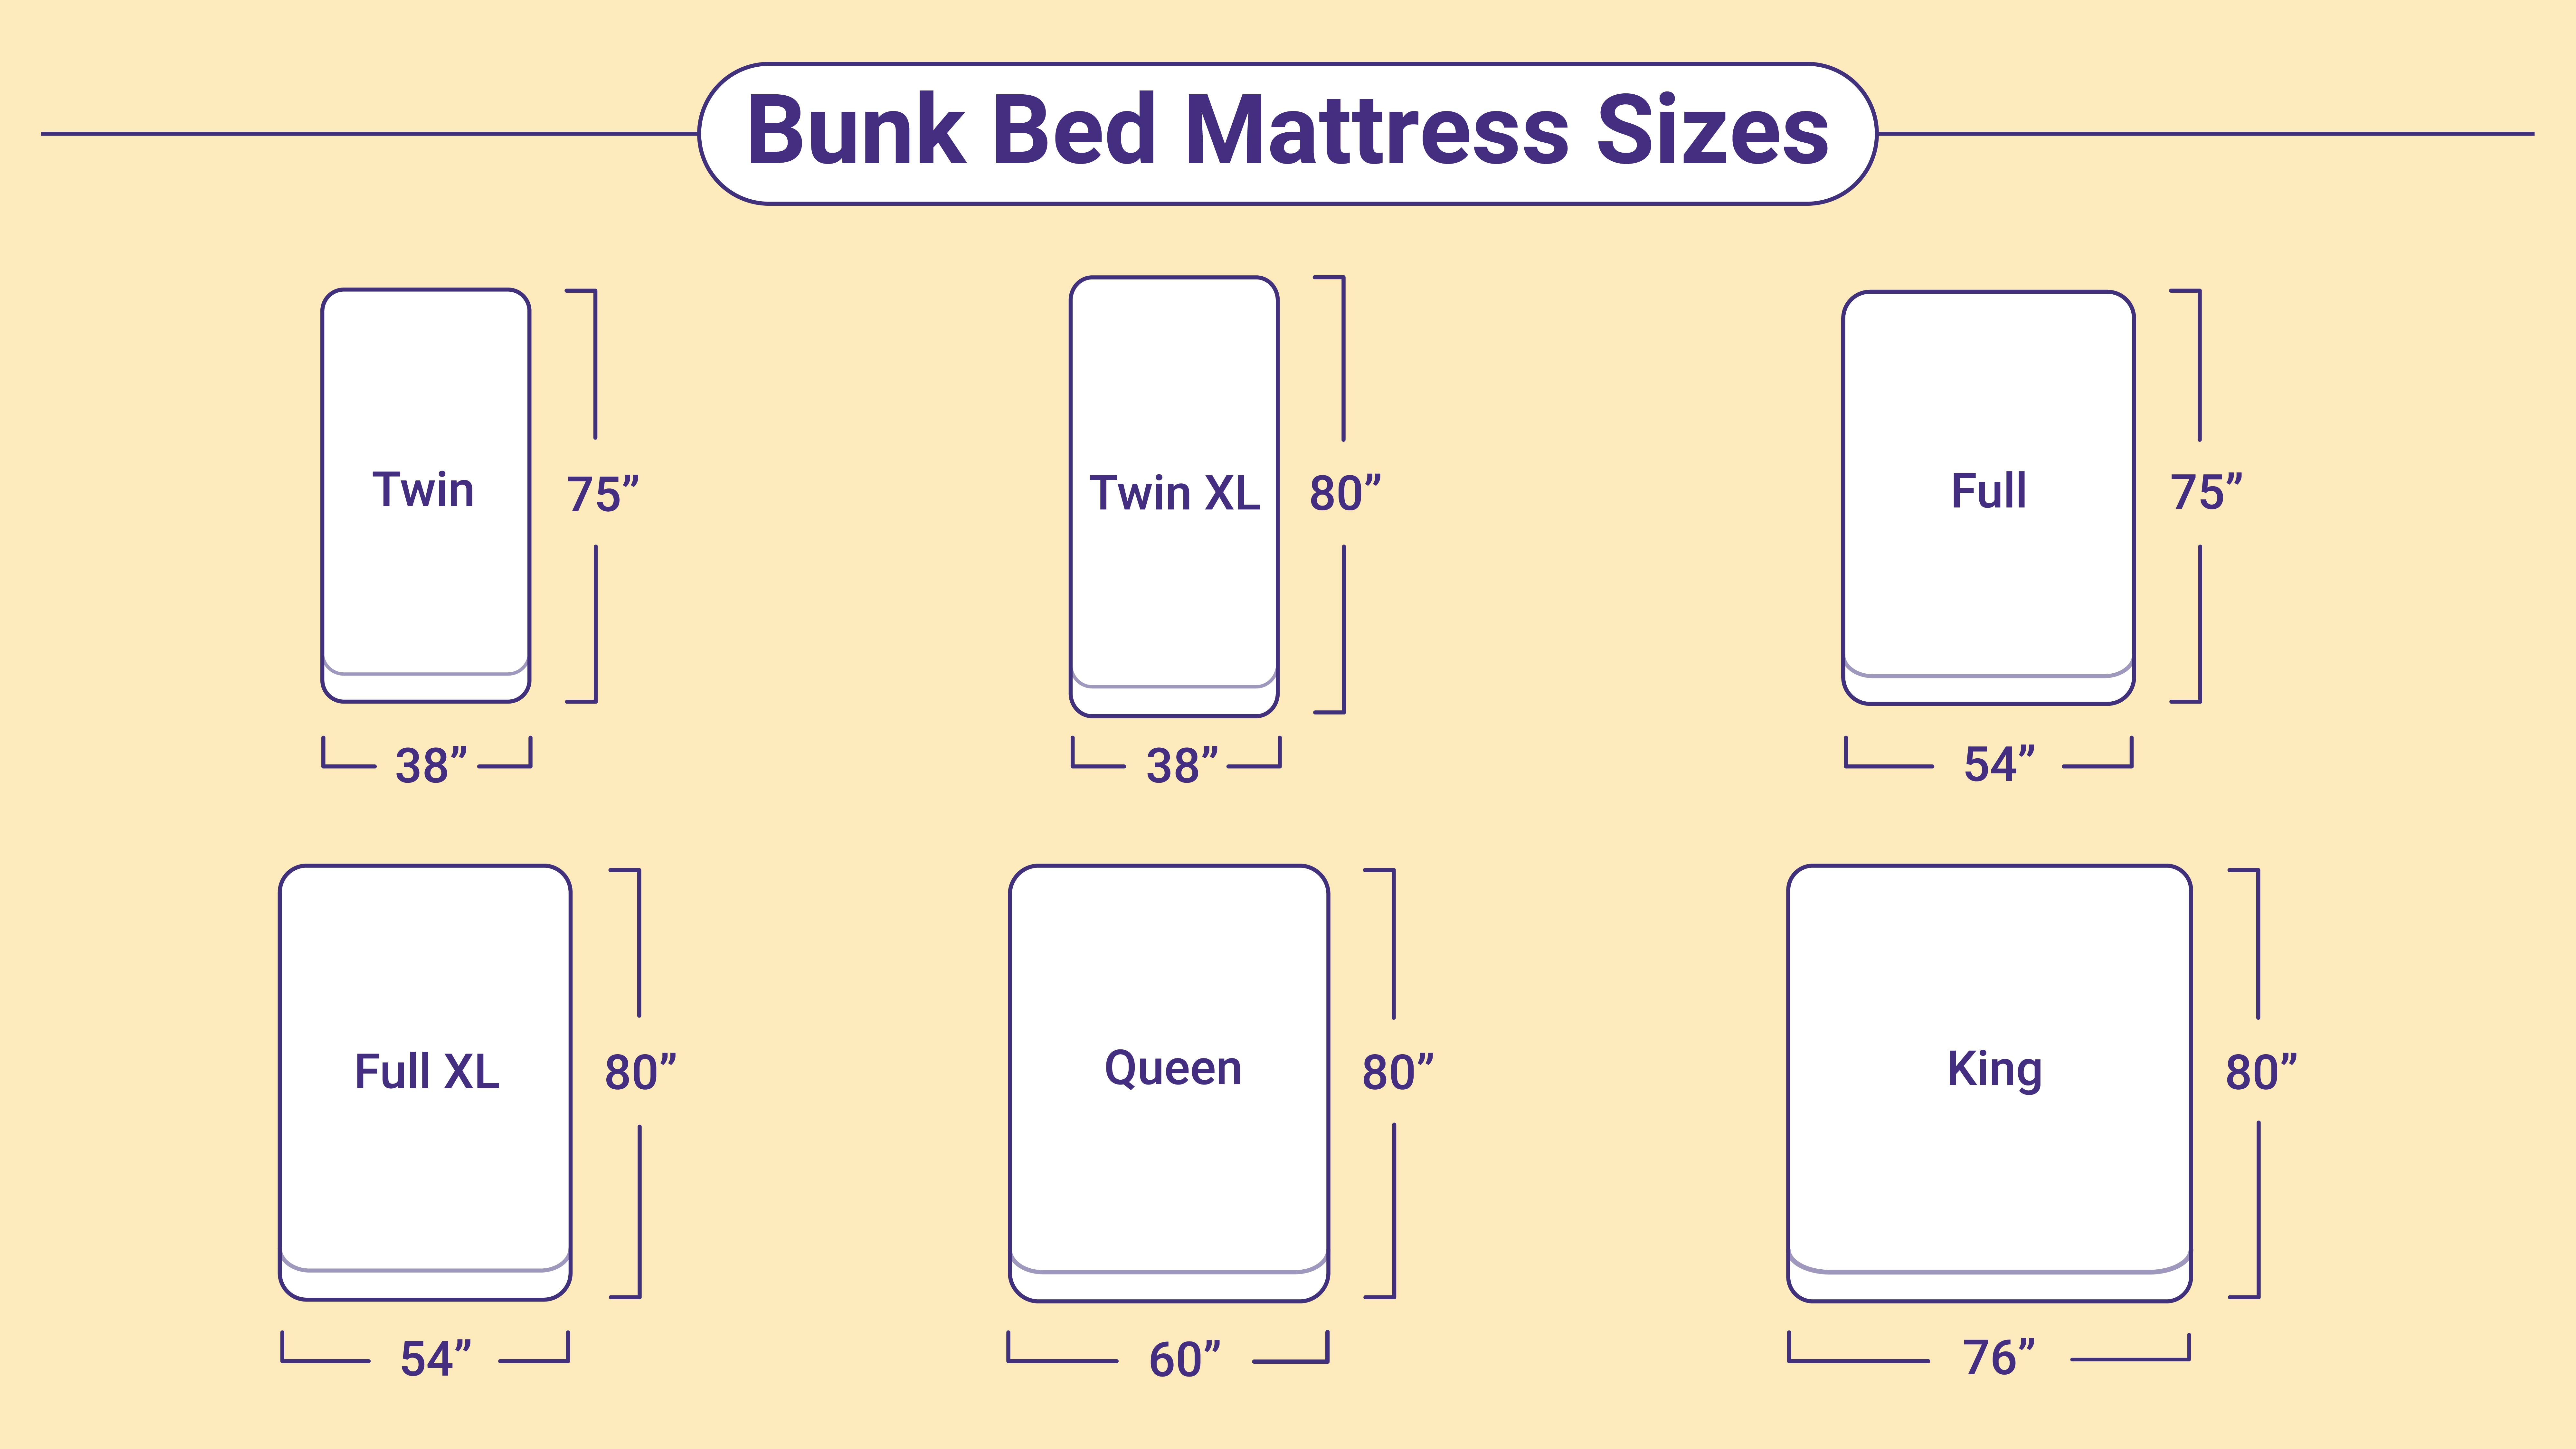 Bunk Bed Mattress Sizes And Dimensions, Twin Bunk Bed Width